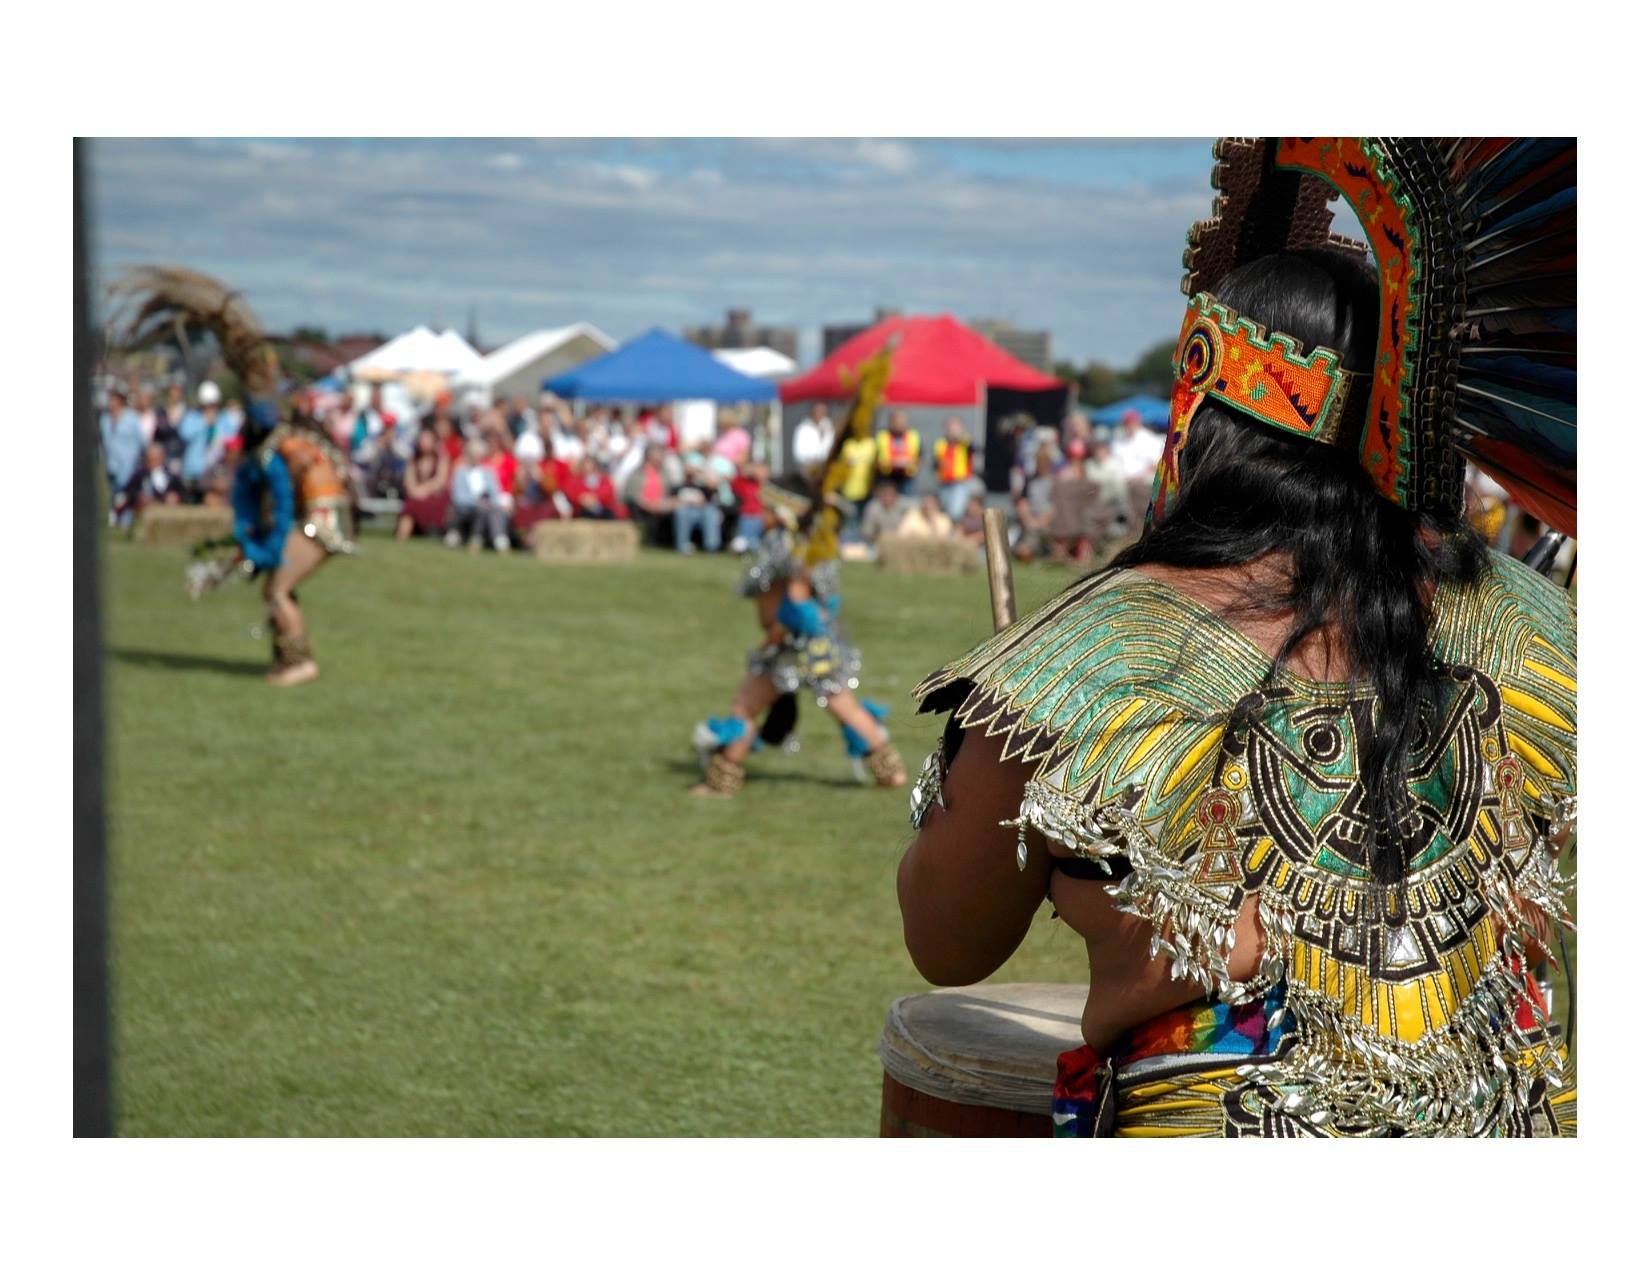 Held annually the weekend after Labor Day in September, Akwesasne International Pow Wow is the largest event of the year with arts, crafts, dance competitions, food vendors and more.